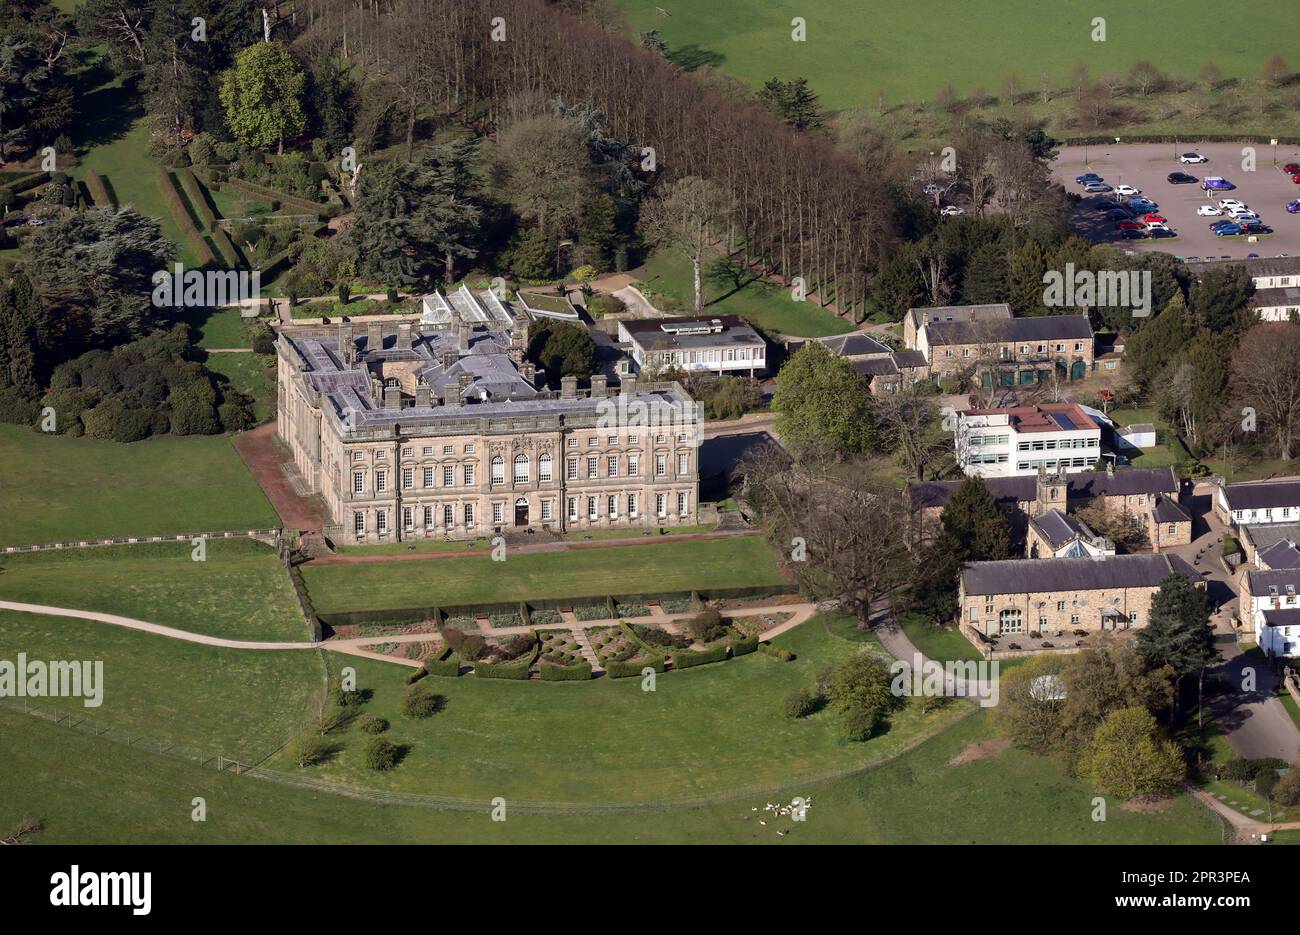 Aerial view of Wentworth Castle & Gardens, Barnsley, South Yorkshire. The main house is used by Northern College. Student halls are on the right here. Stock Photo